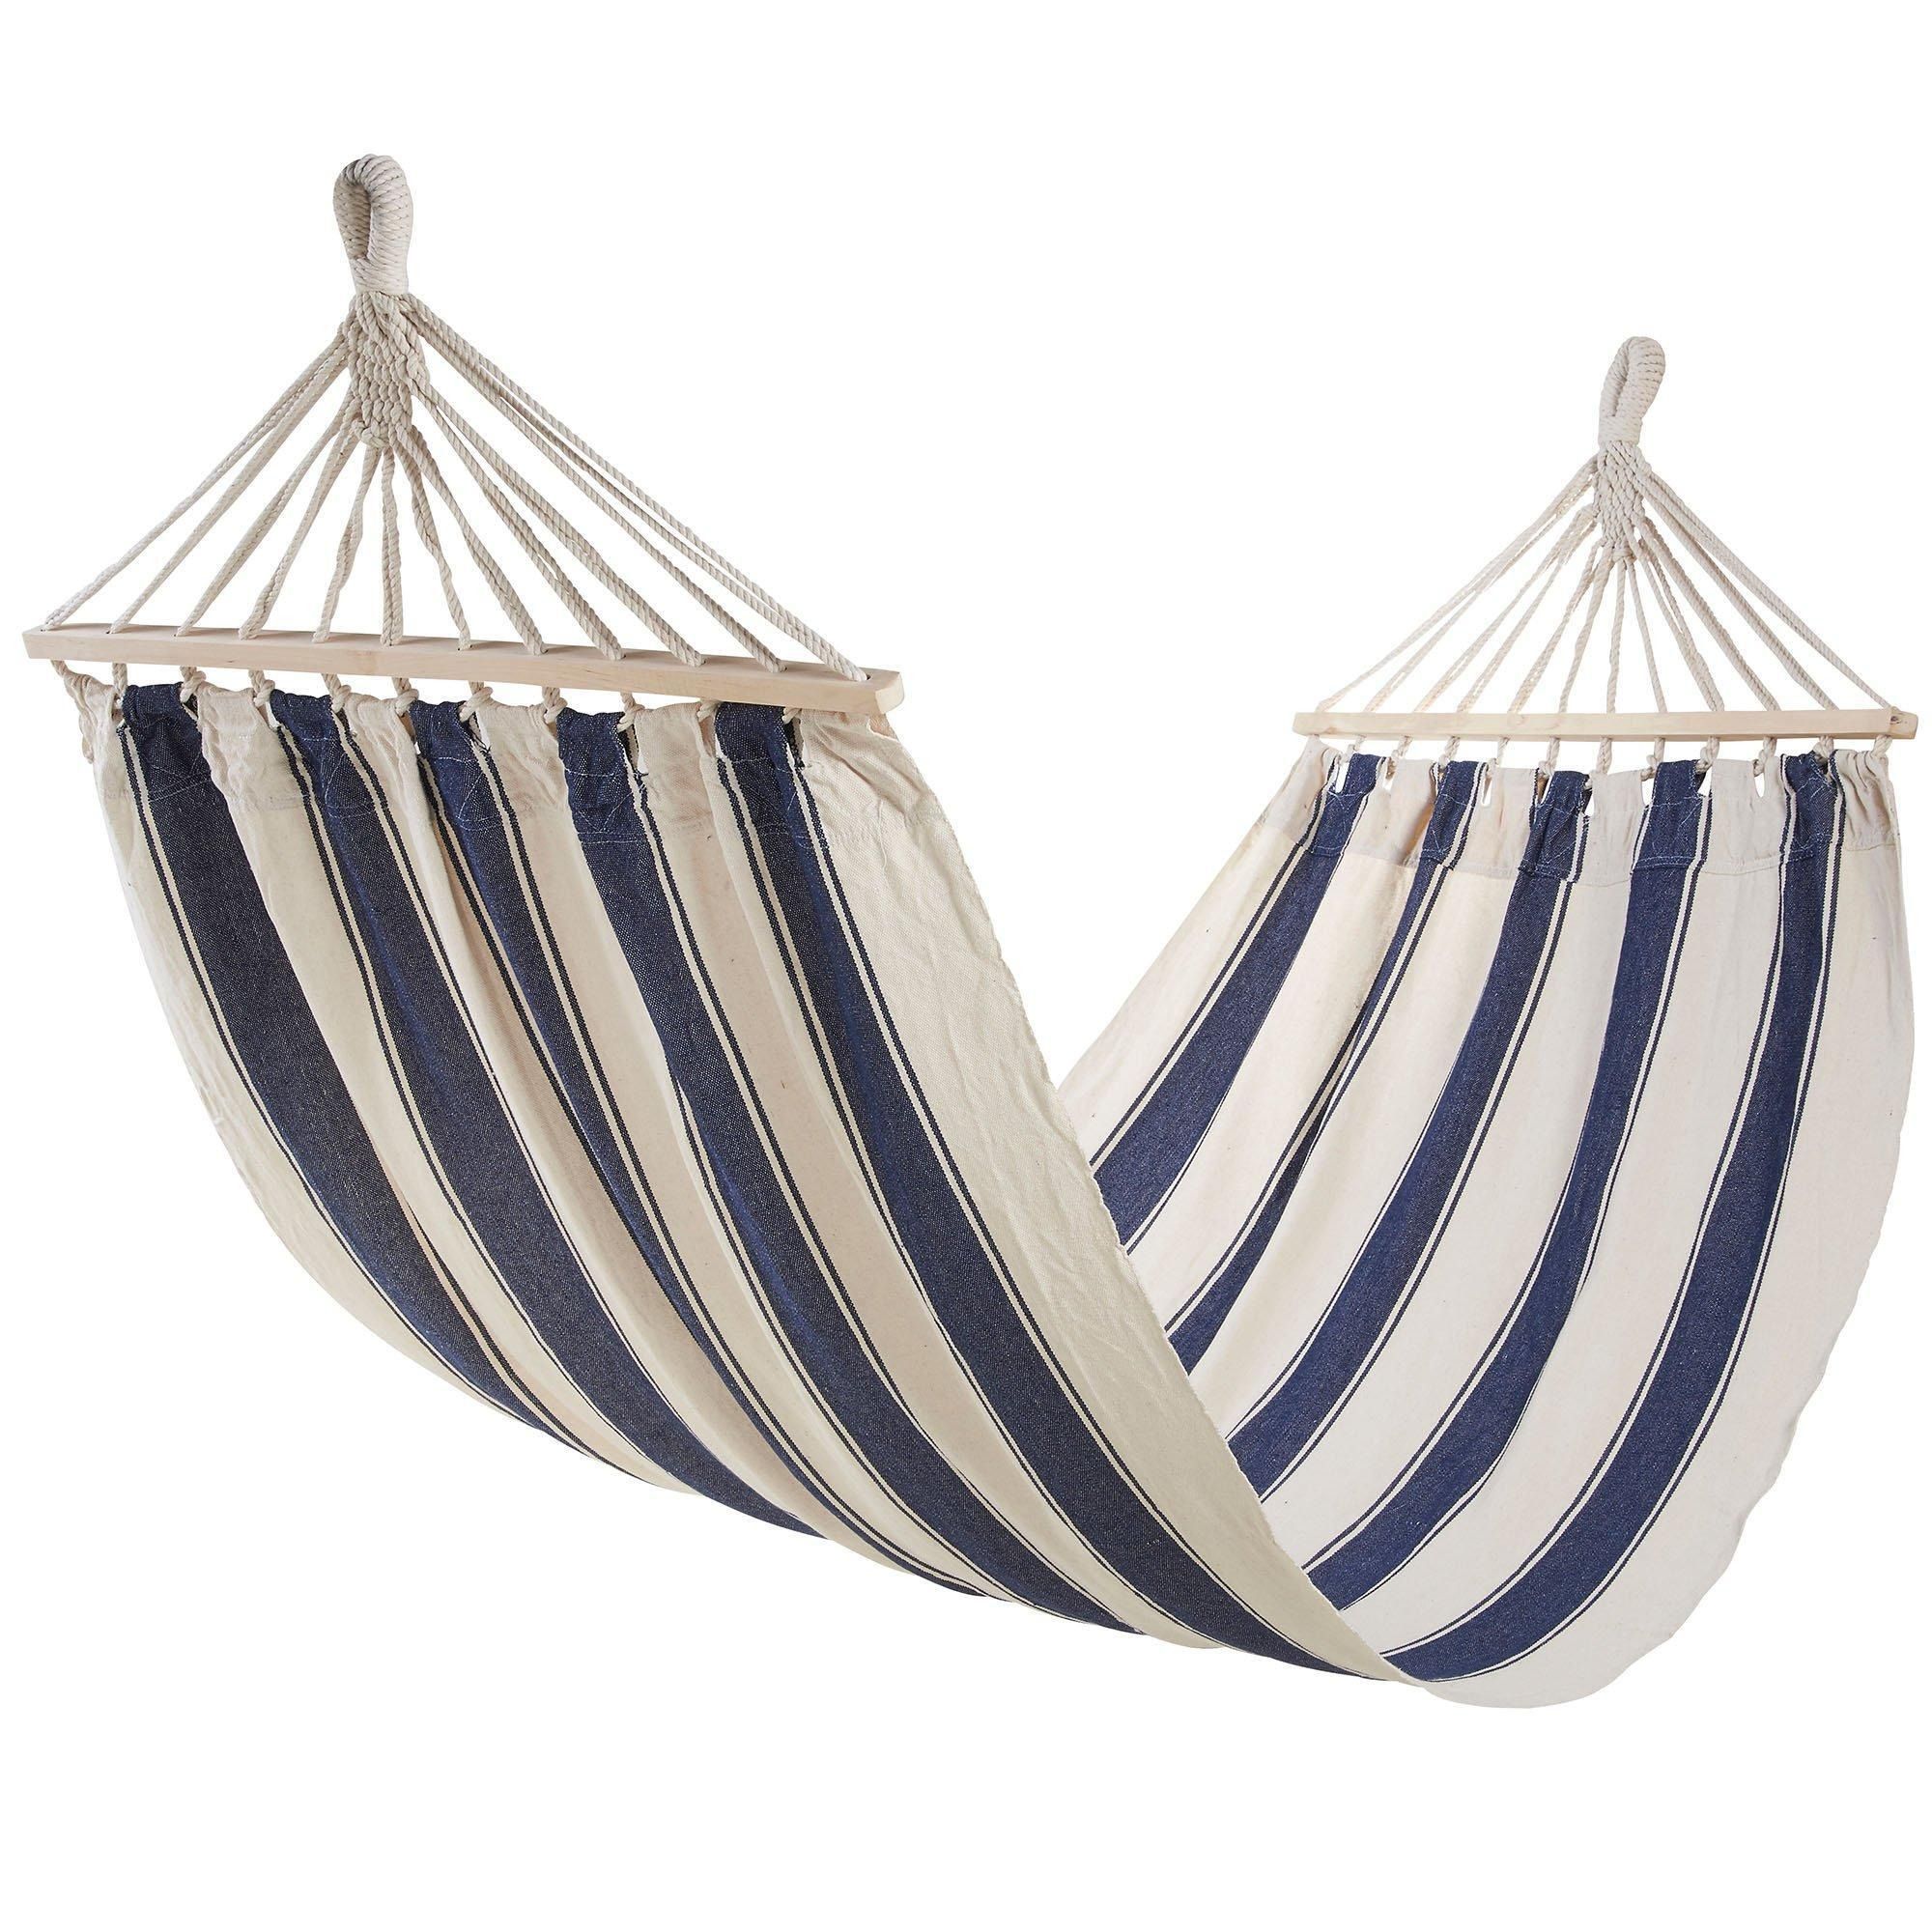 Striped Cotton Garden and Patio 1 Seater Single Hammock - image 1